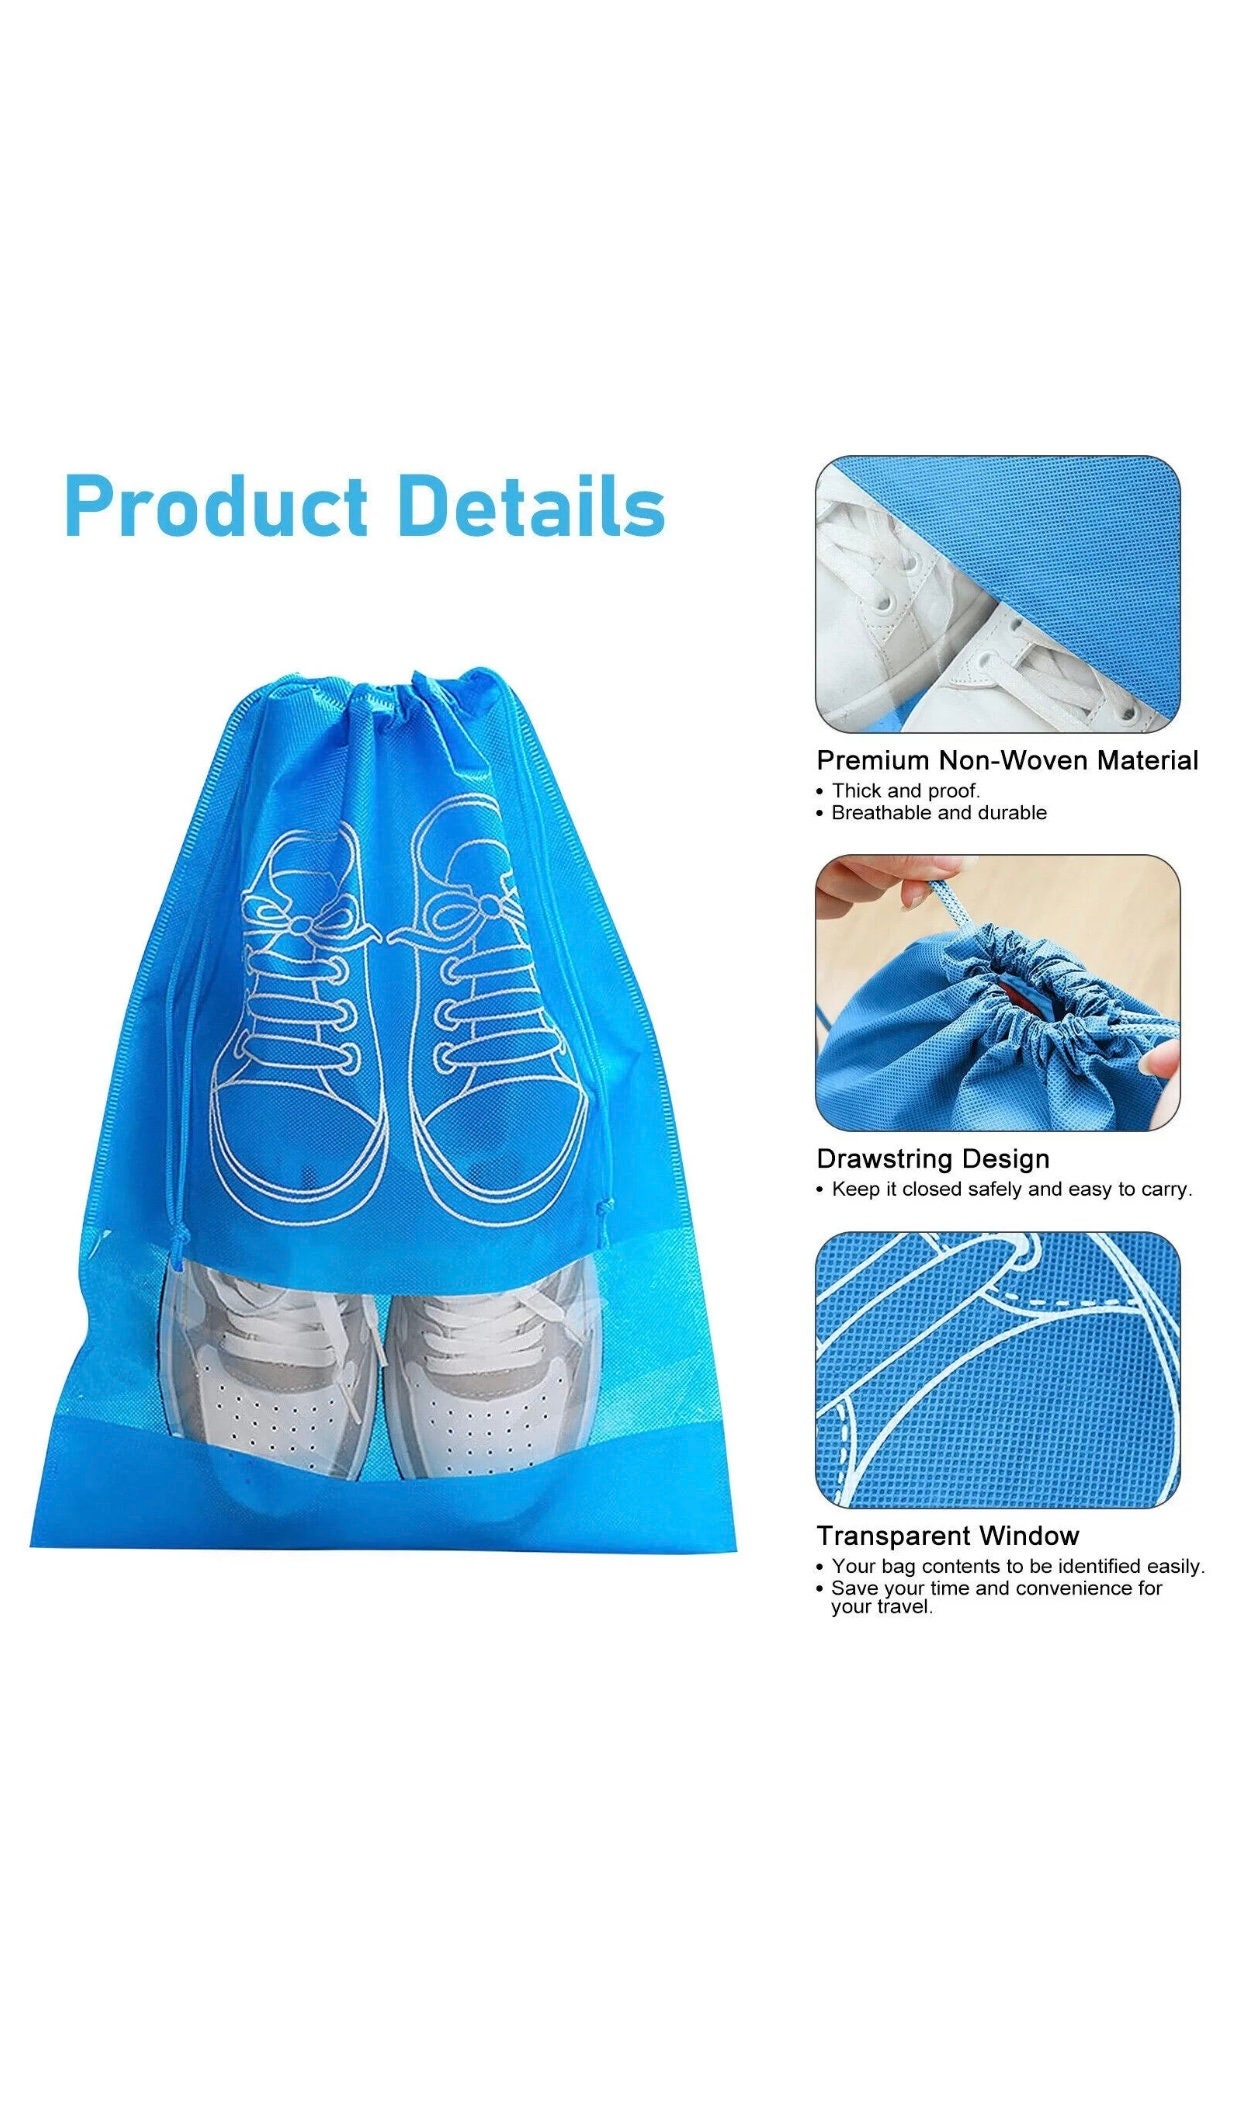 Flannel Shoe Bags for Travel and Storage, 100% Cotton Duster